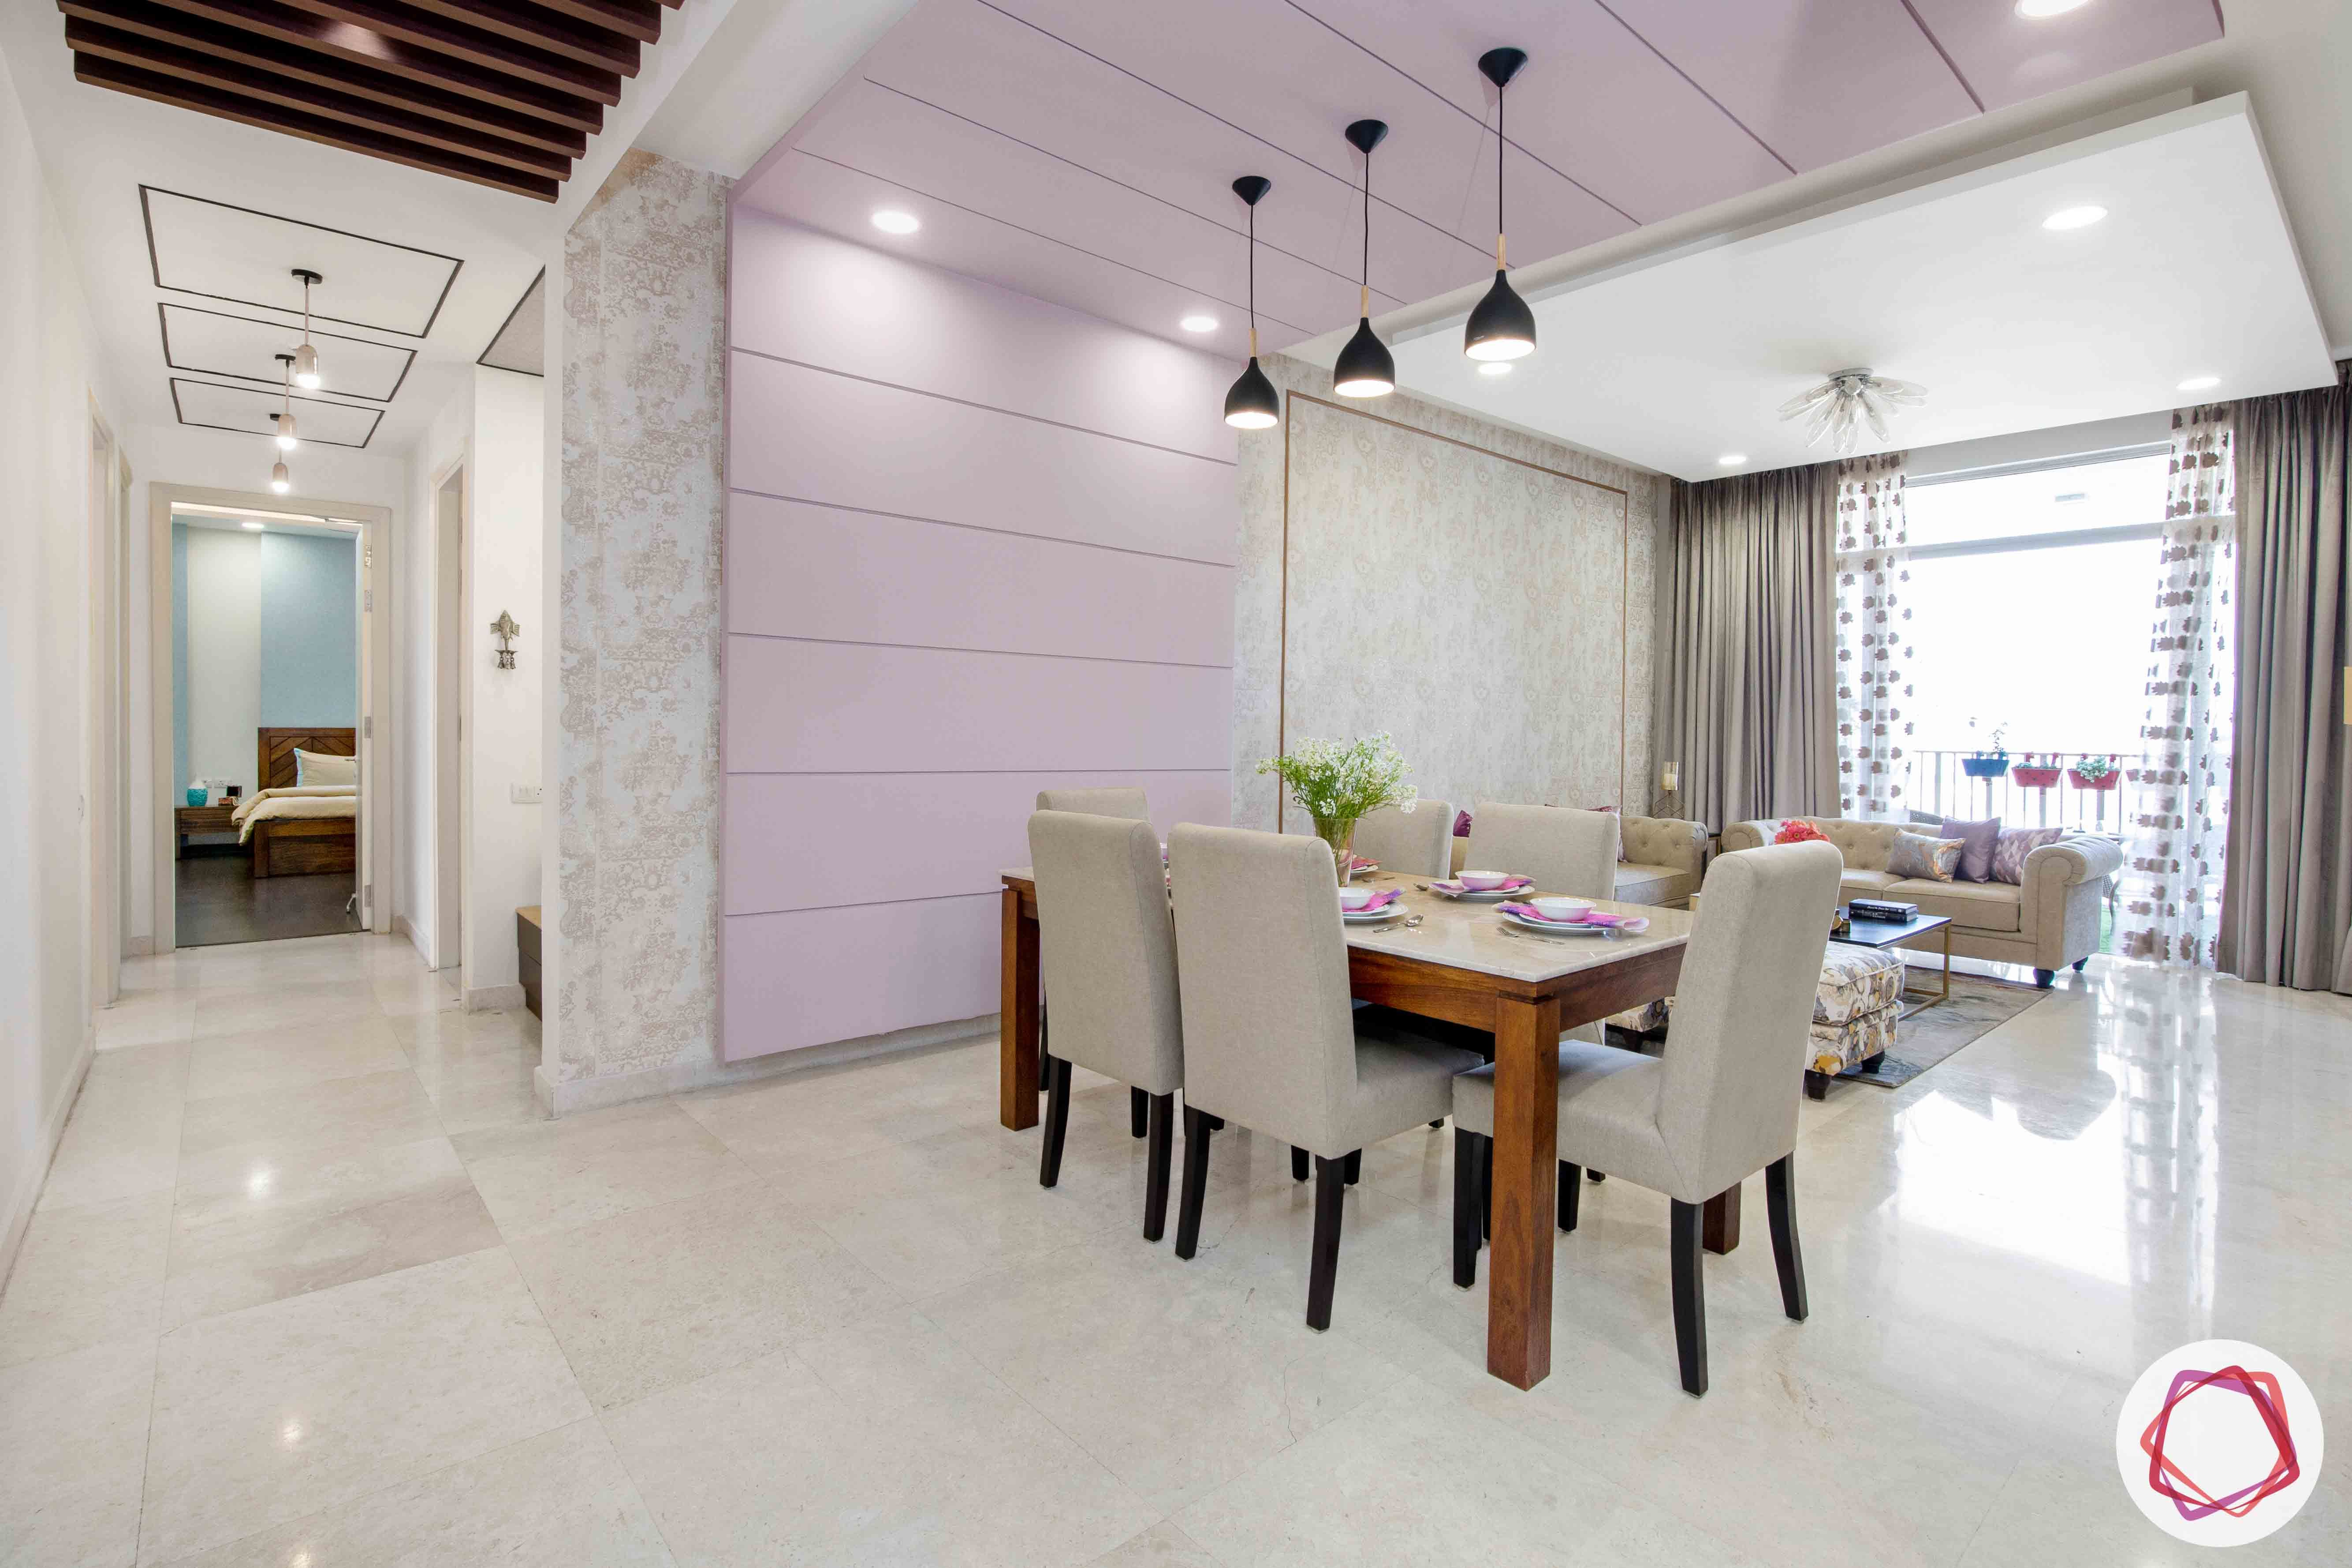 ireo victory valley-dining room-lavender wall panel-pendant lights